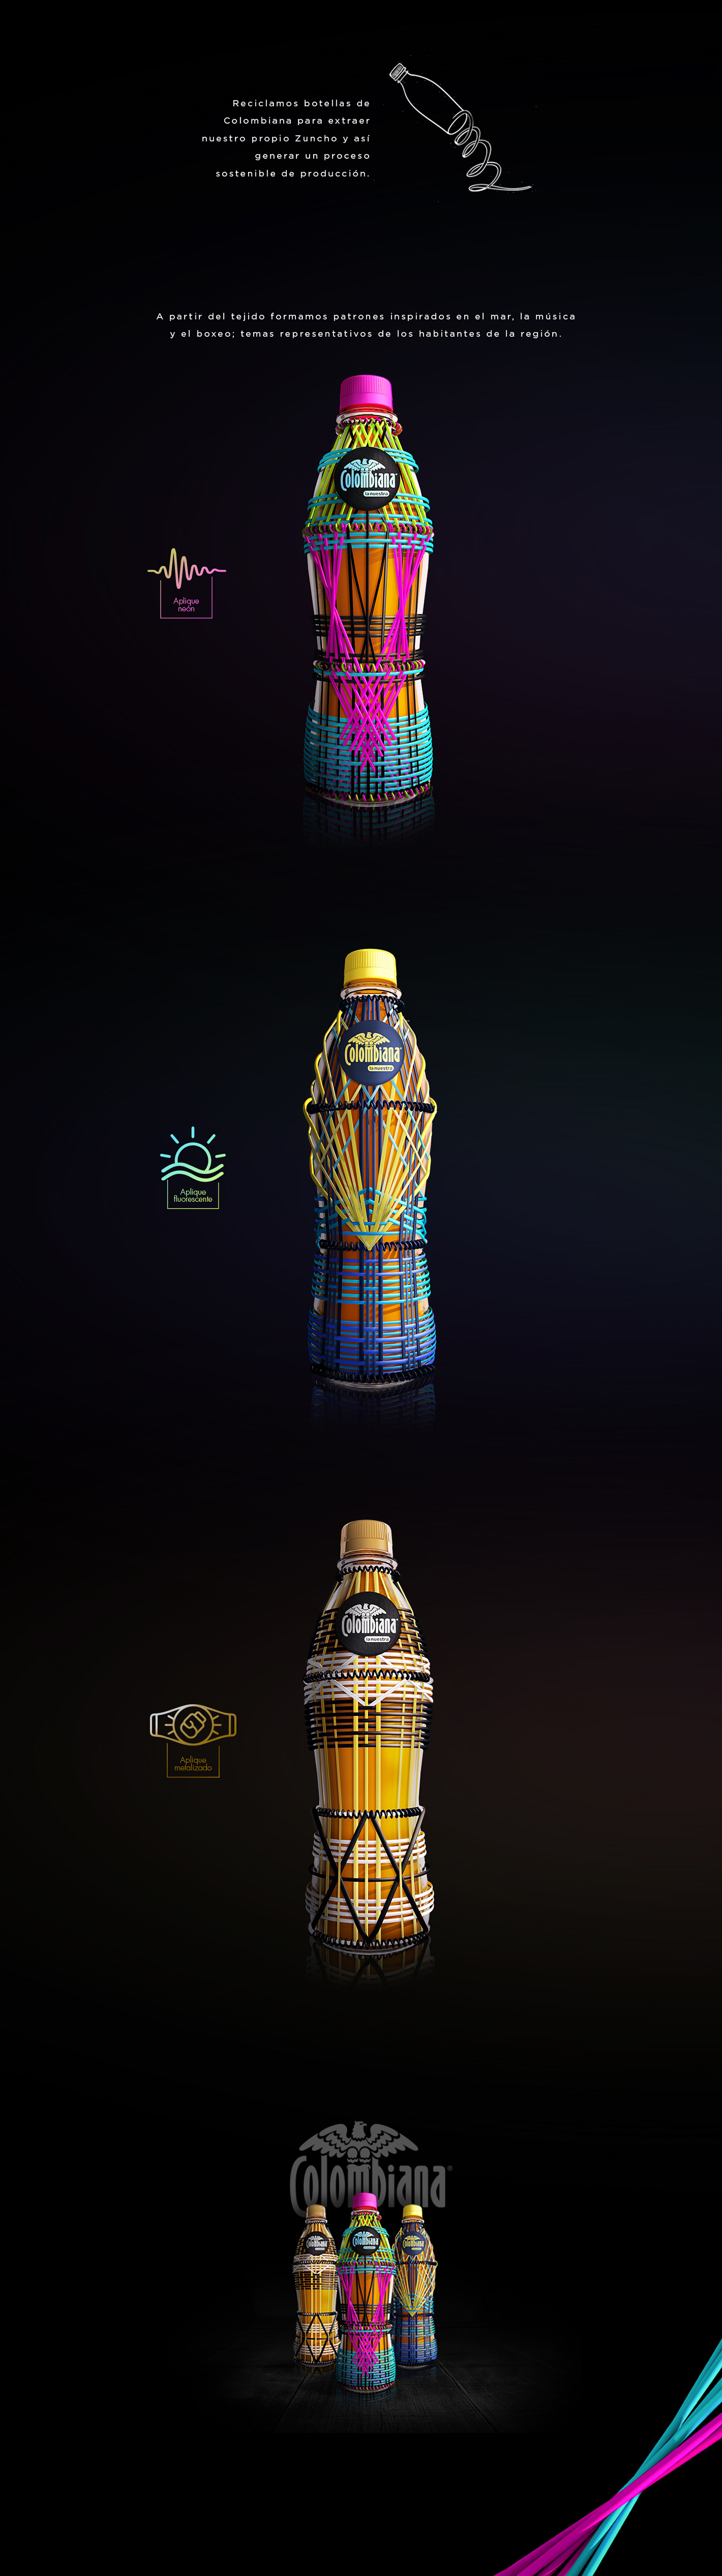 colombiana zuncho Young lions bottle drink Caribe colors design product